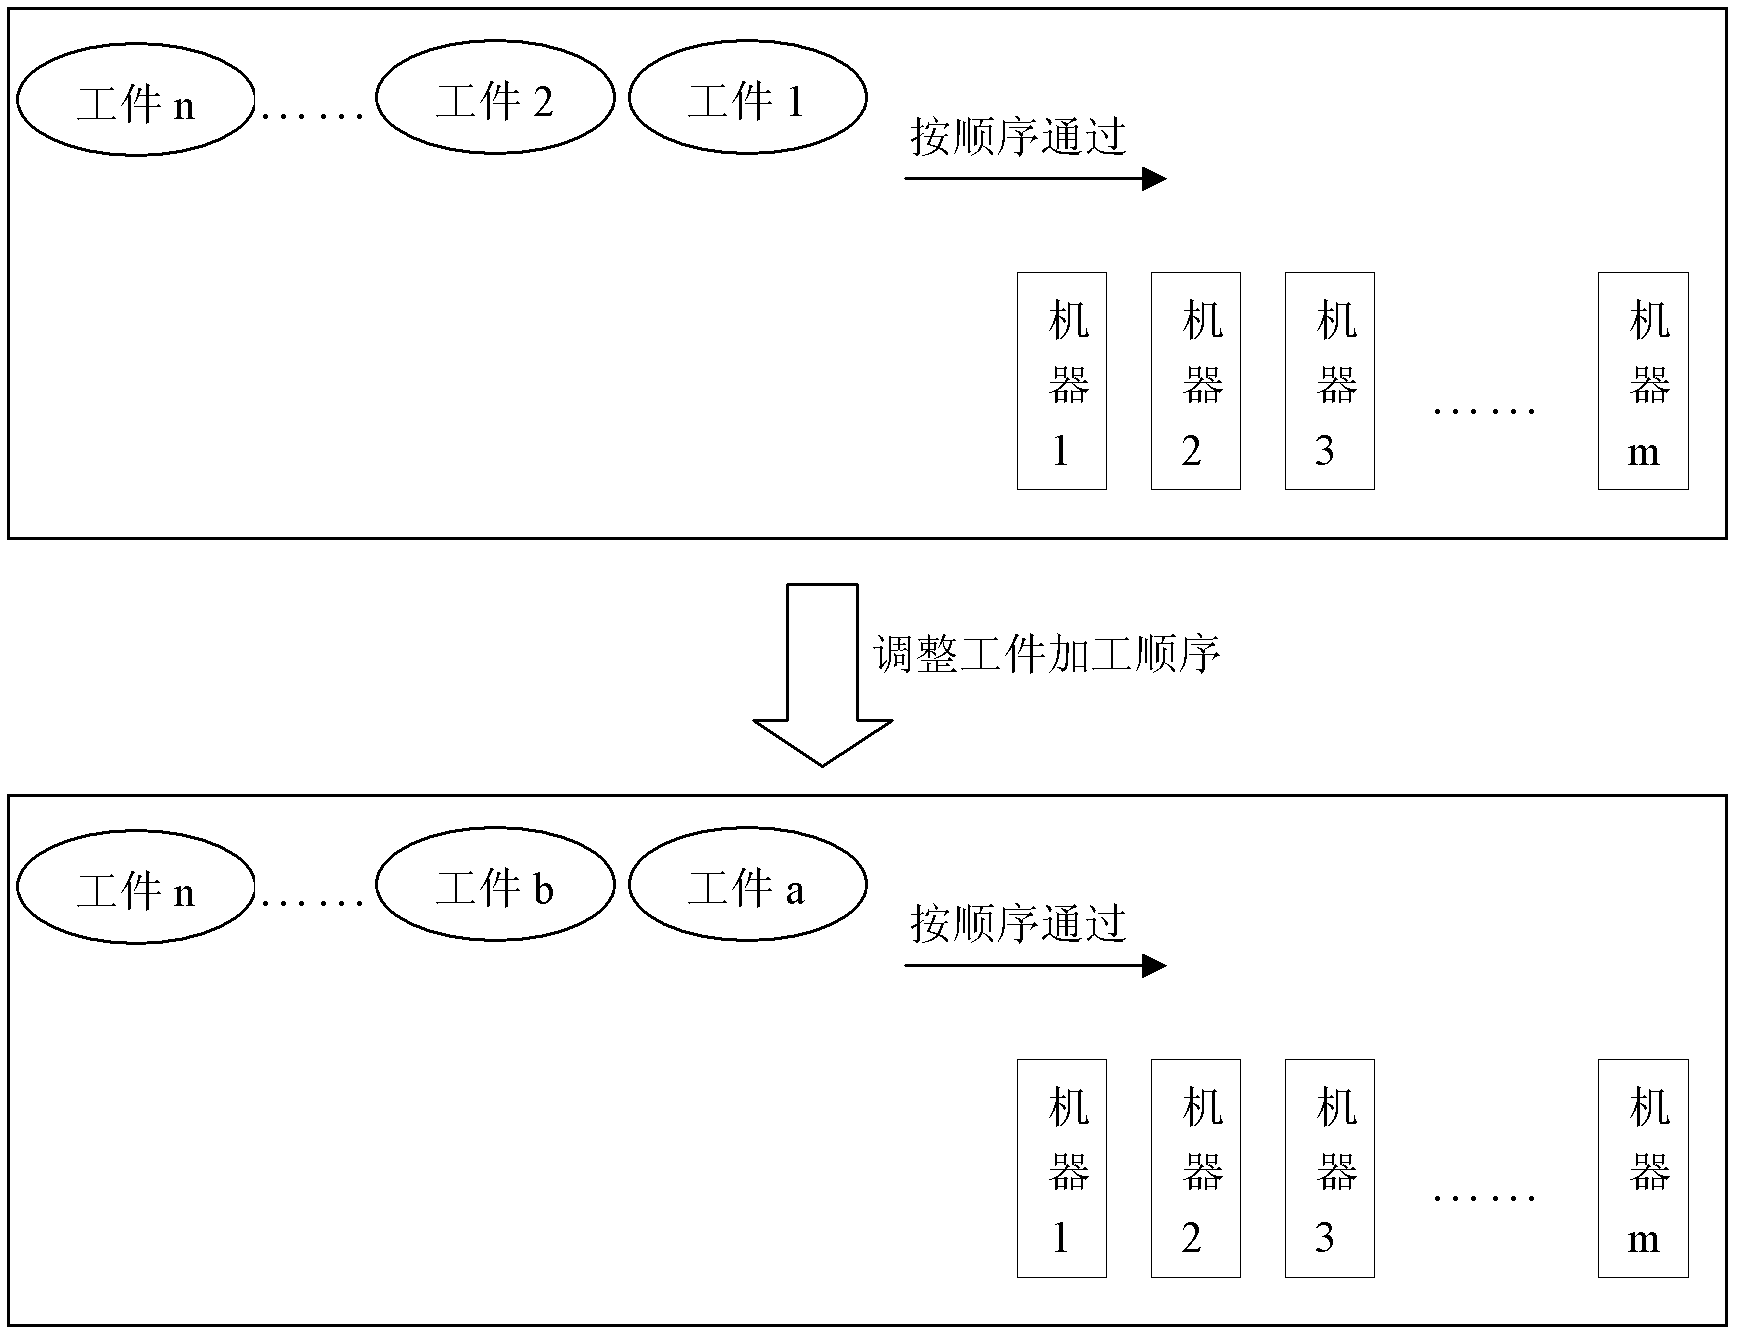 Production line scheduling method based on constructive heuristic algorithm